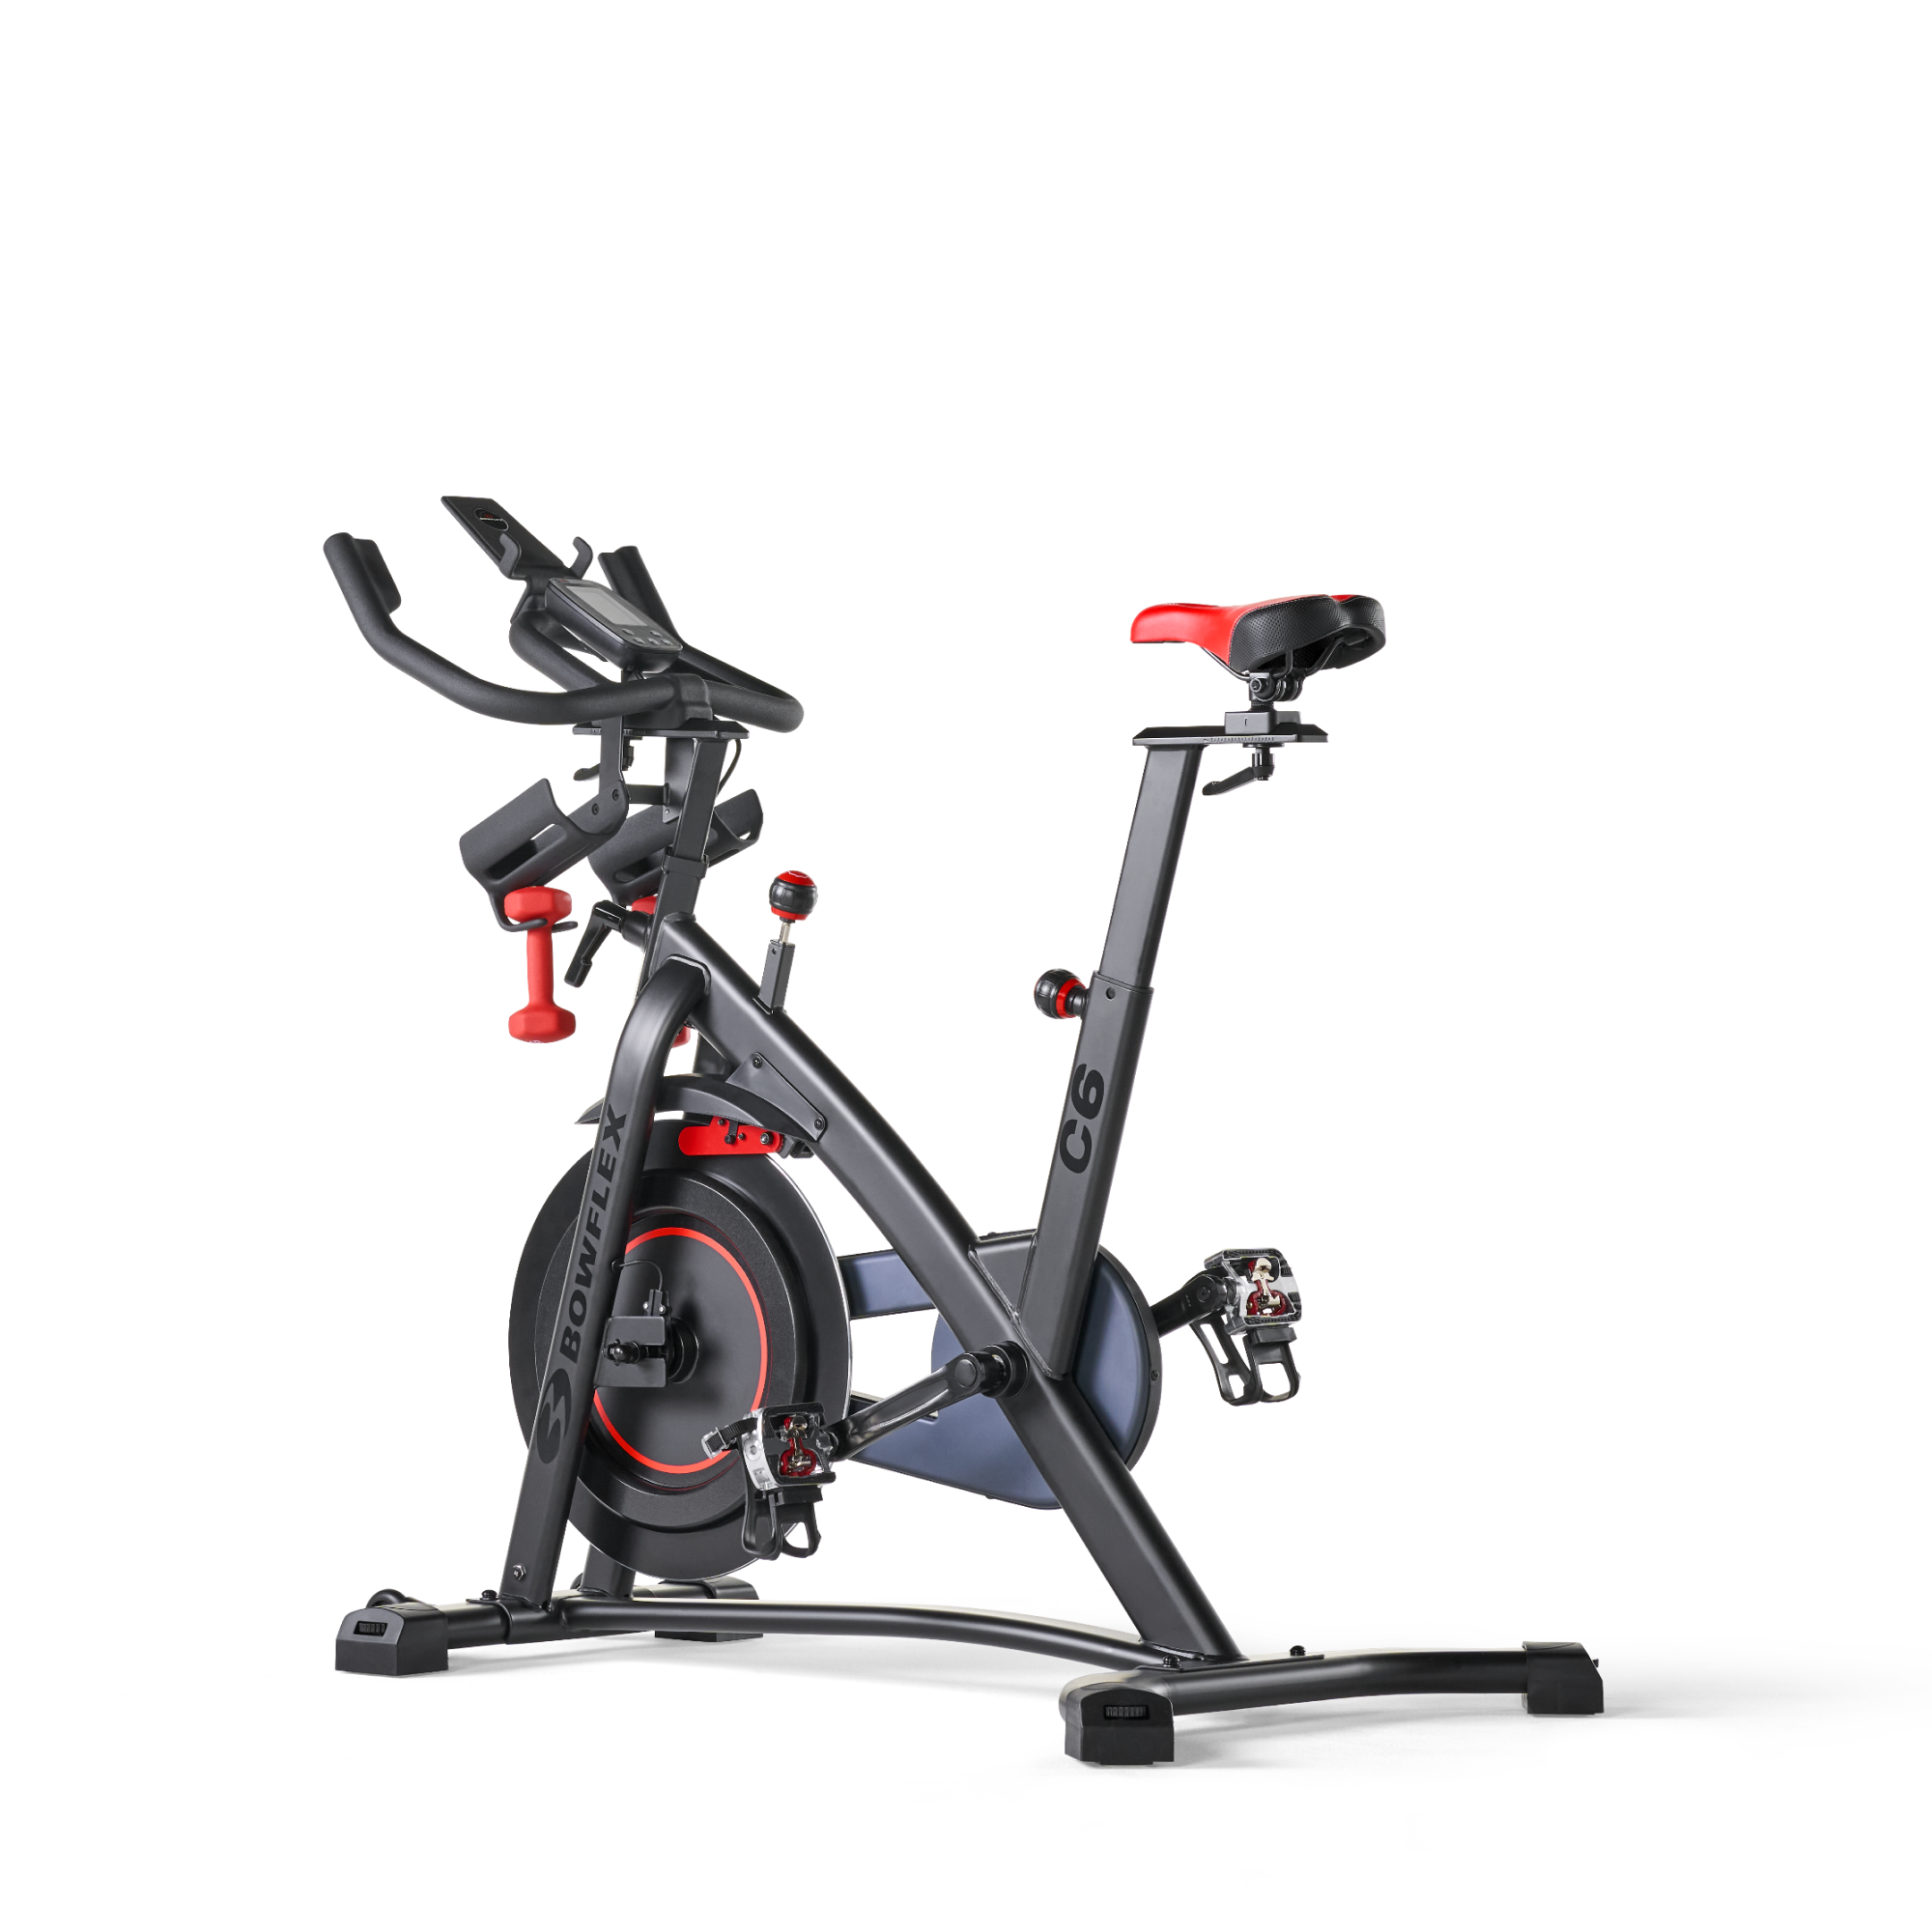 Pace Connected Spinner® Bike